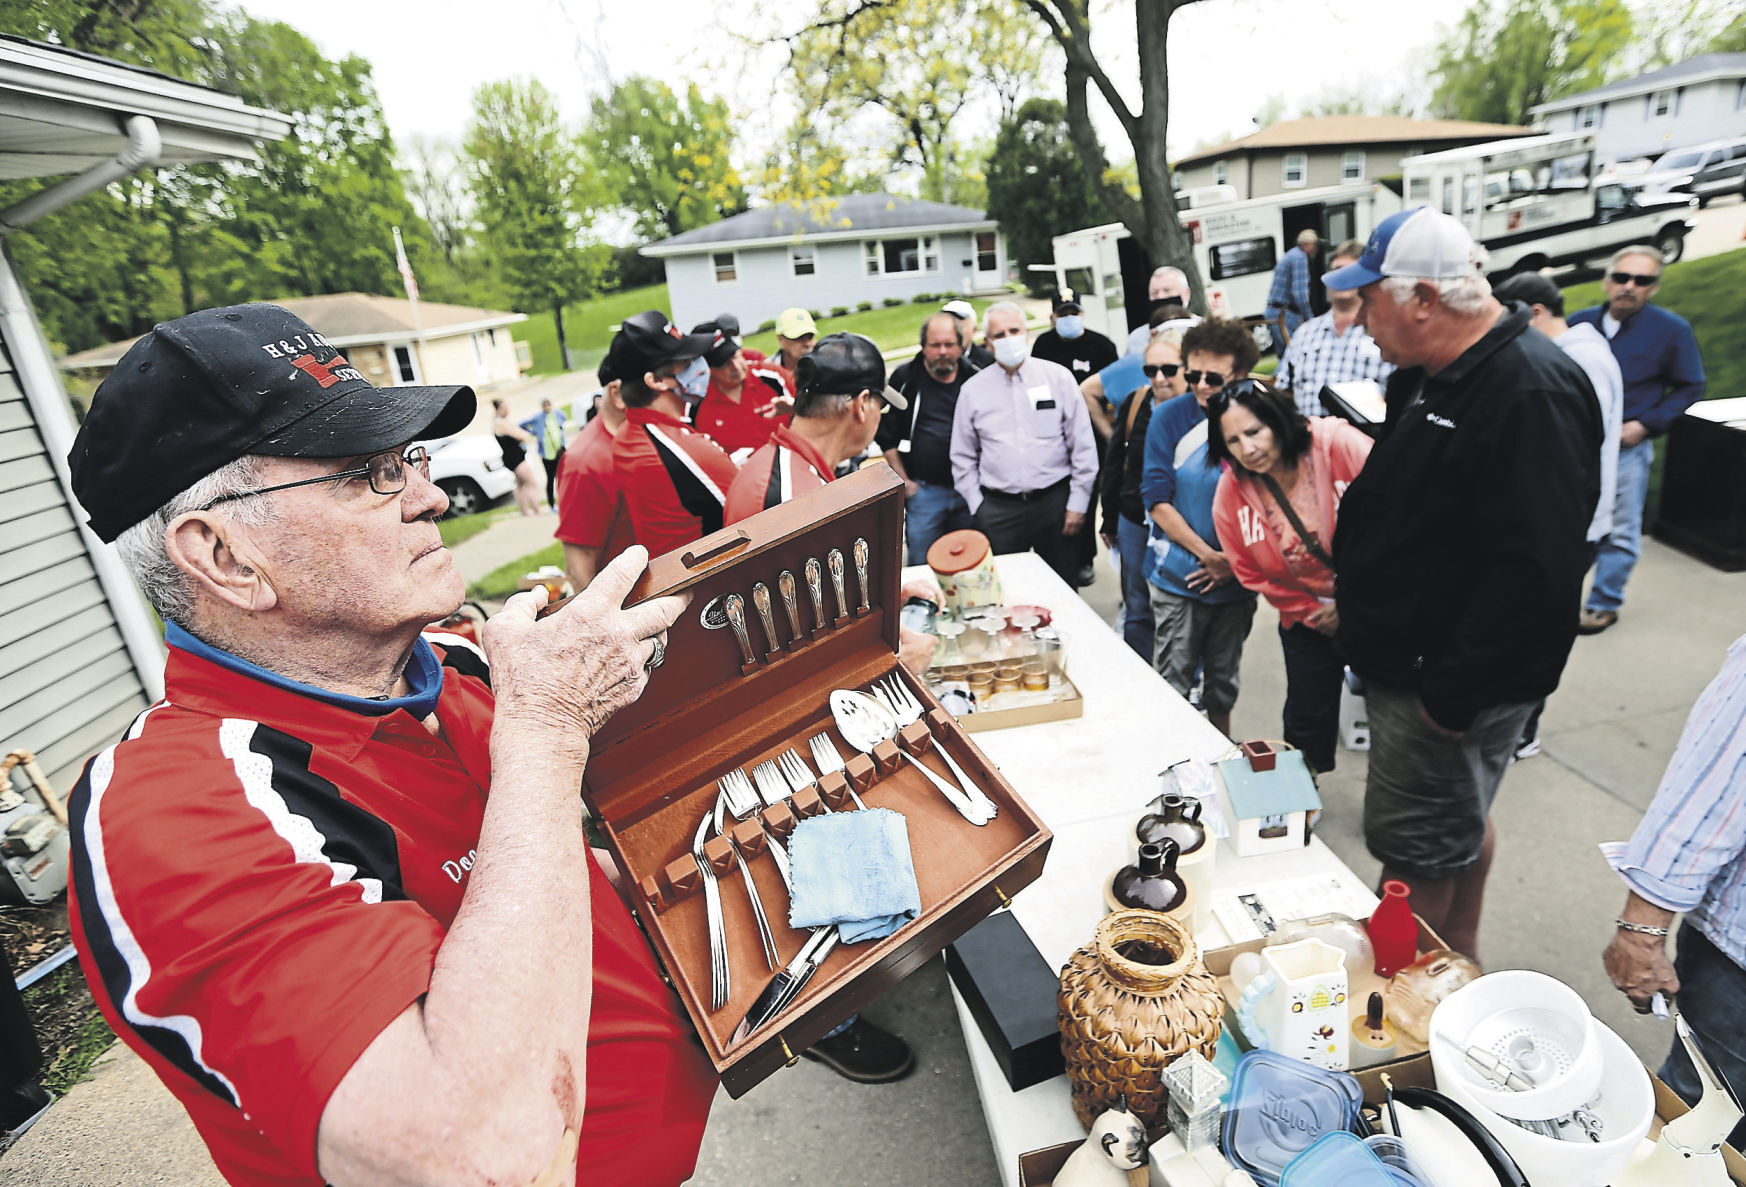 Doc Johnston (left), co-owner of H&J Auction Service, shows off an item for bidding during an estate auction. PHOTO CREDIT: Dave Kettering